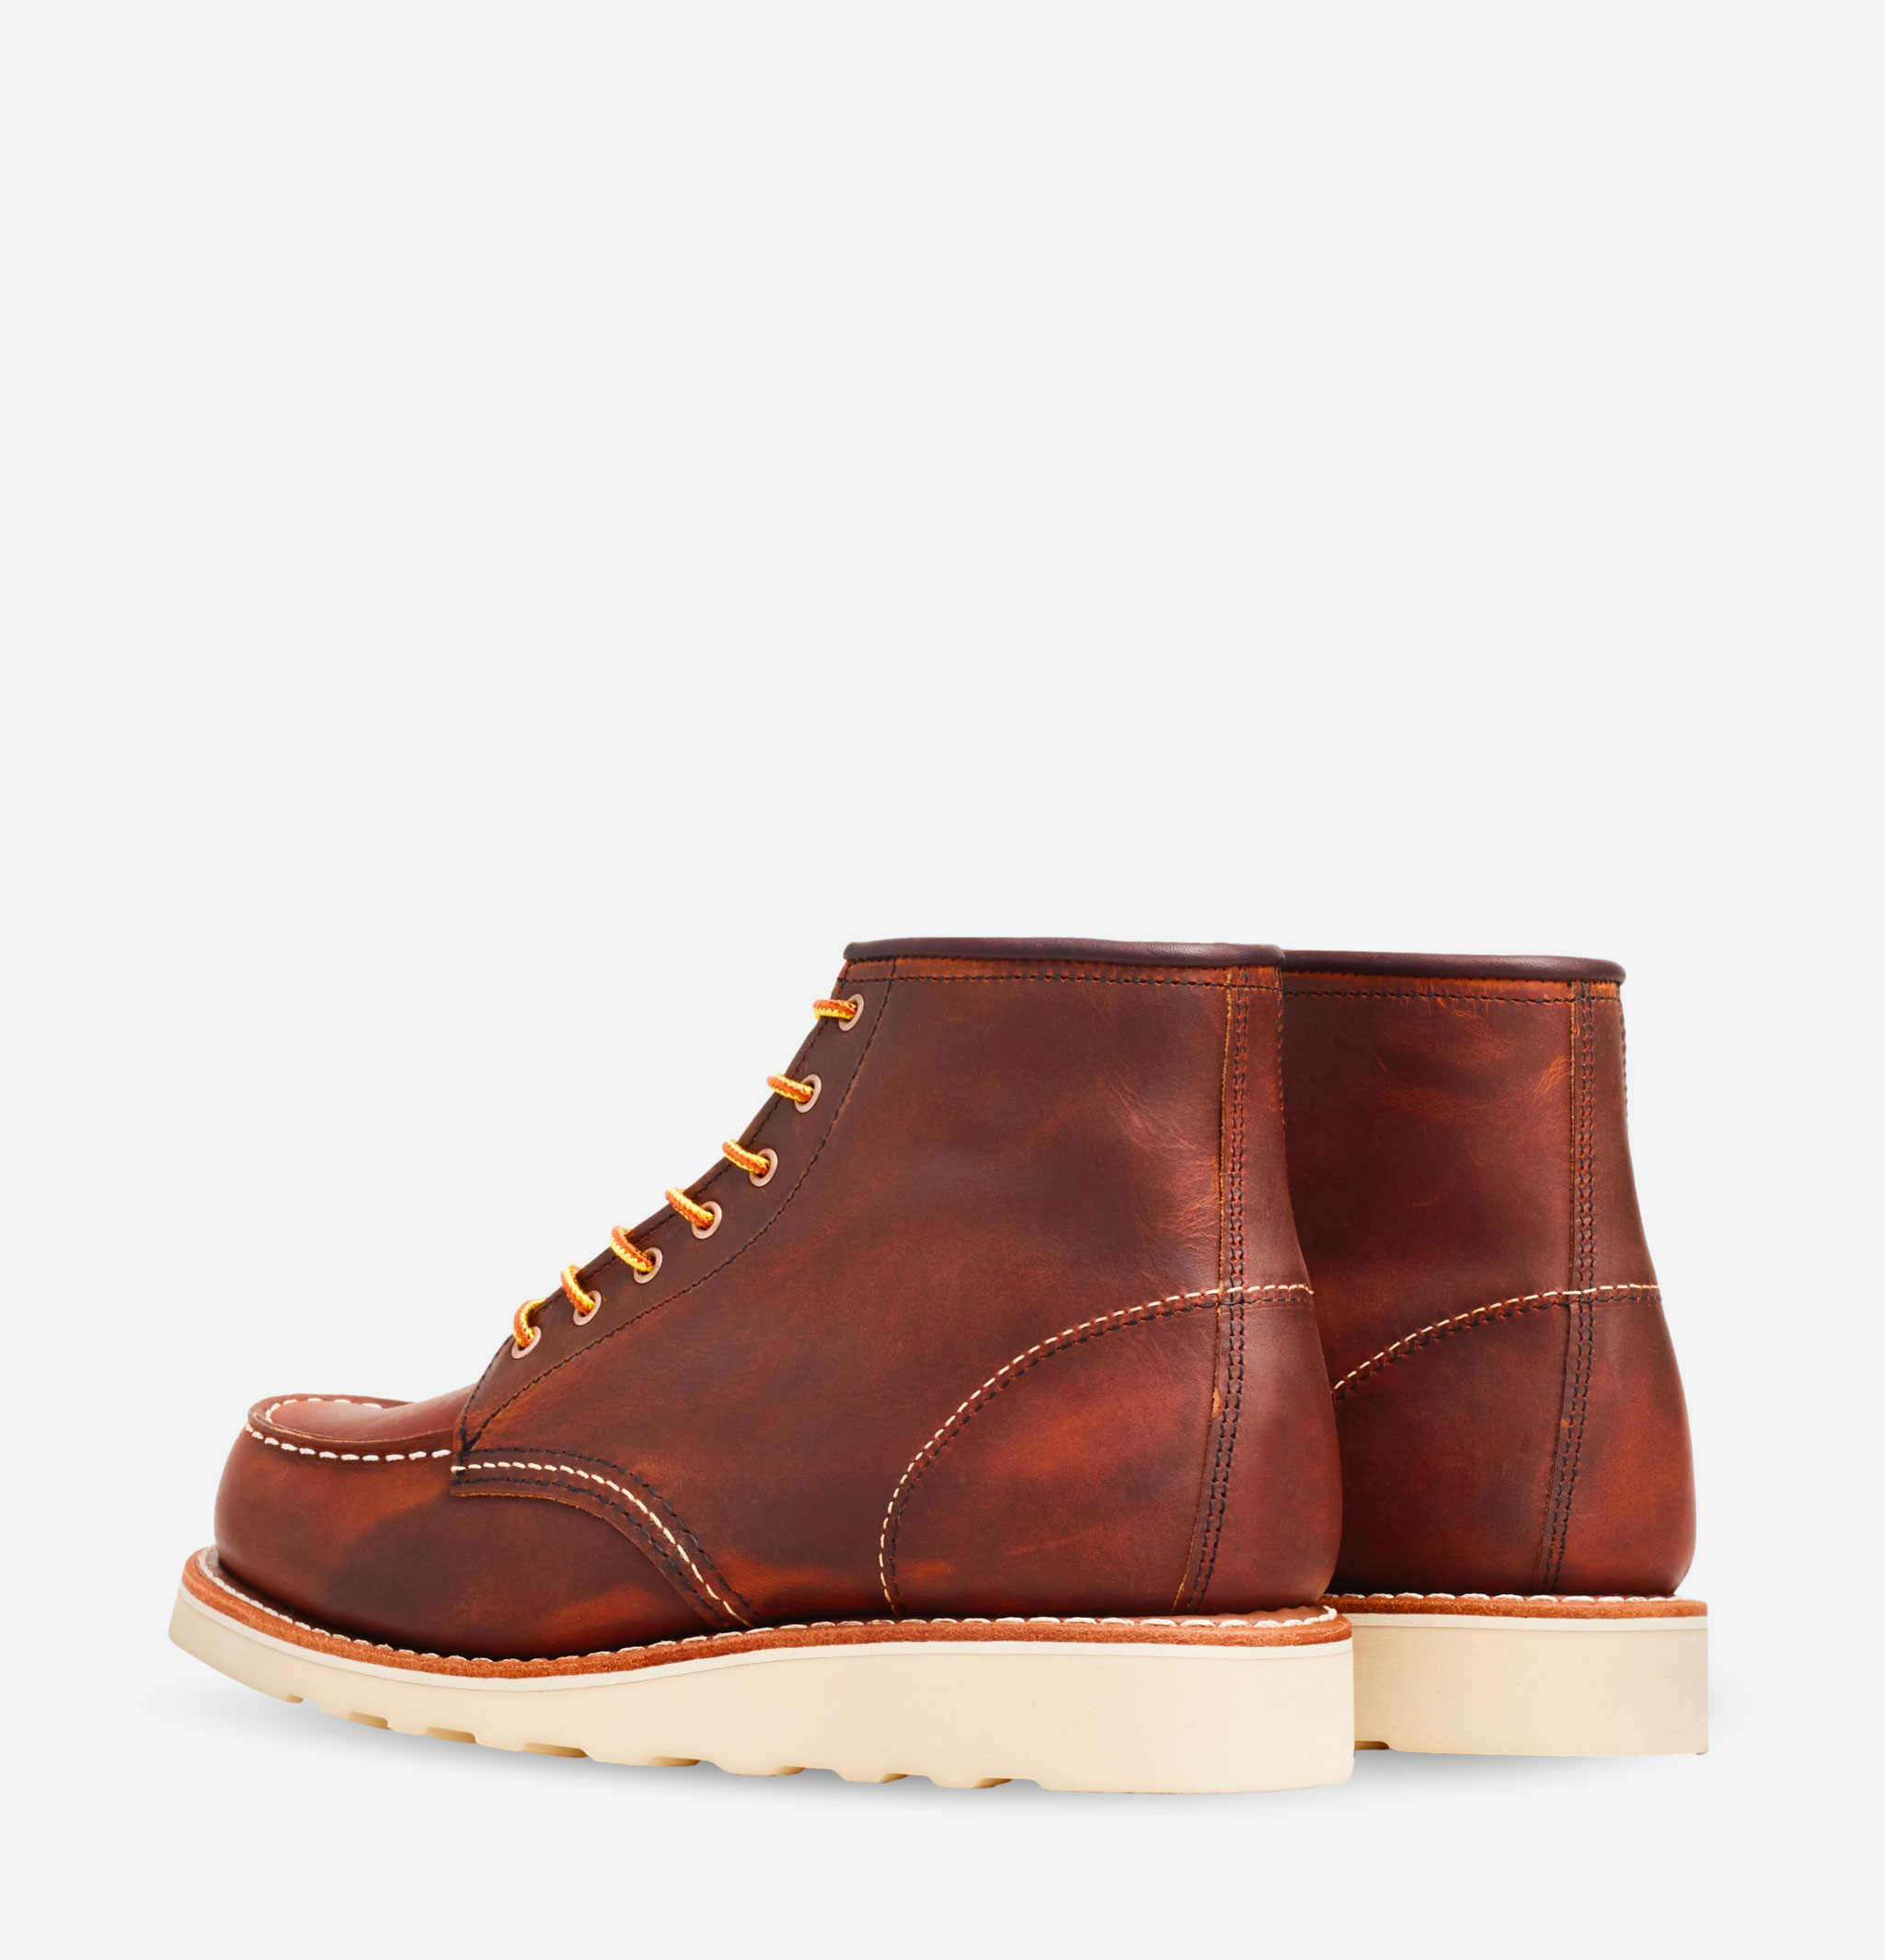 Red Wing Shoes Woman - 3428 - Moc Toe Rough and Tough